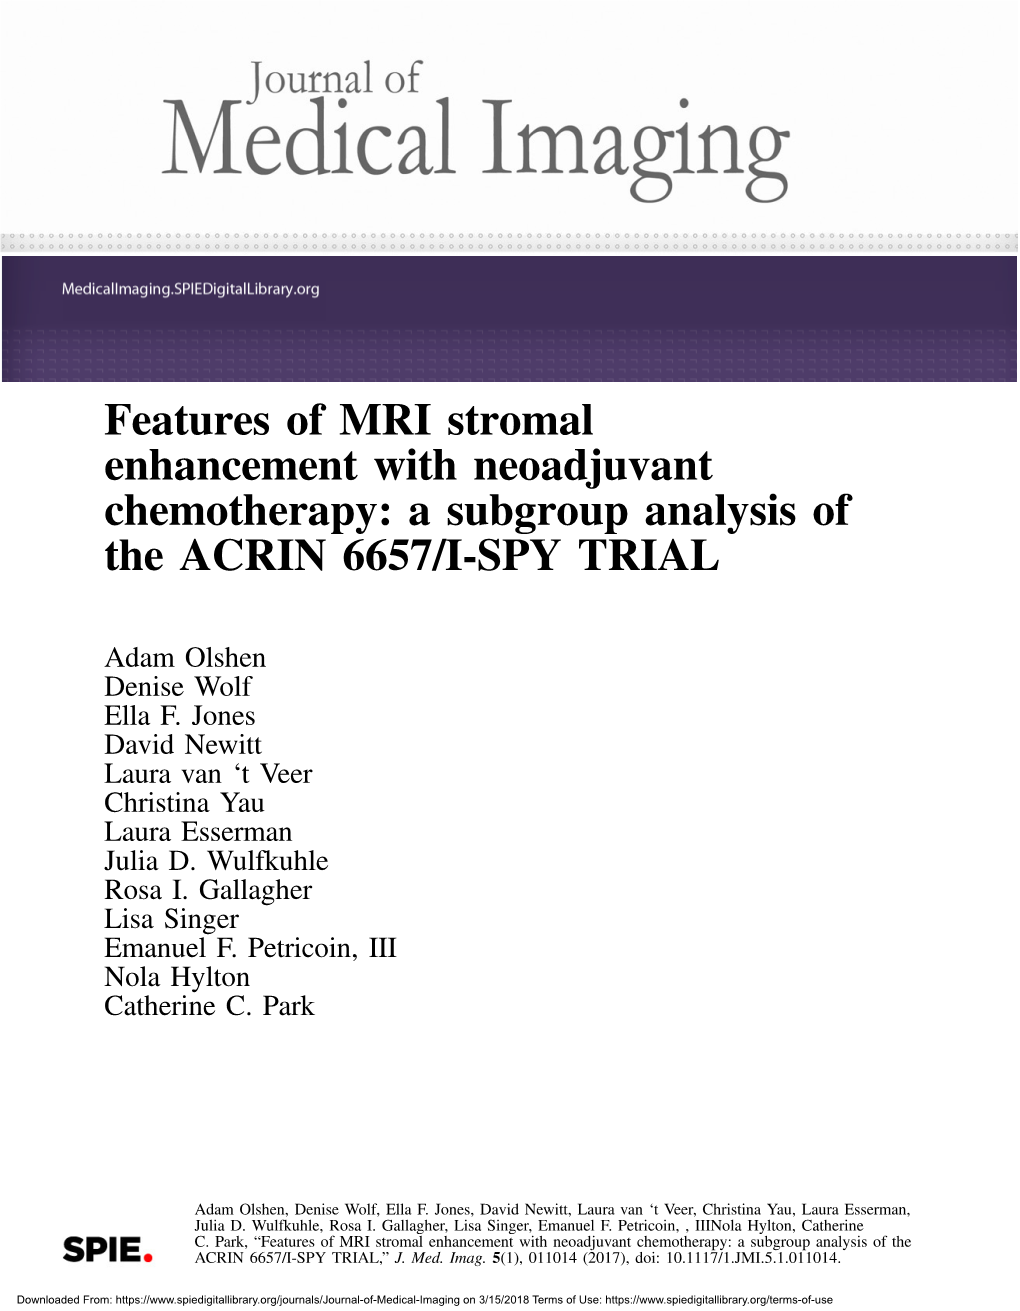 Features of MRI Stromal Enhancement with Neoadjuvant Chemotherapy: a Subgroup Analysis of the ACRIN 6657/I-SPY TRIAL